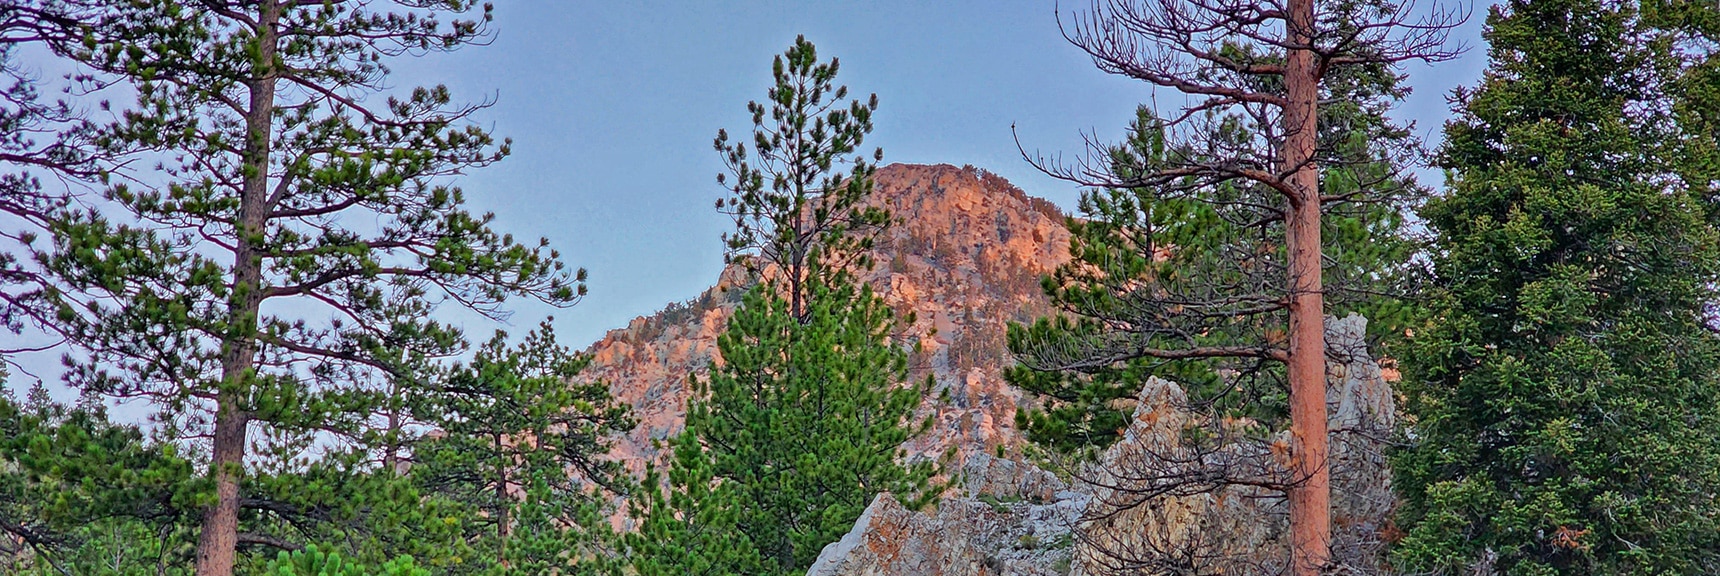 Sisters North from Lee Canyon Road at Sunrise | Sisters North | Lee Canyon | Mt Charleston Wilderness | Spring Mountains, Nevada